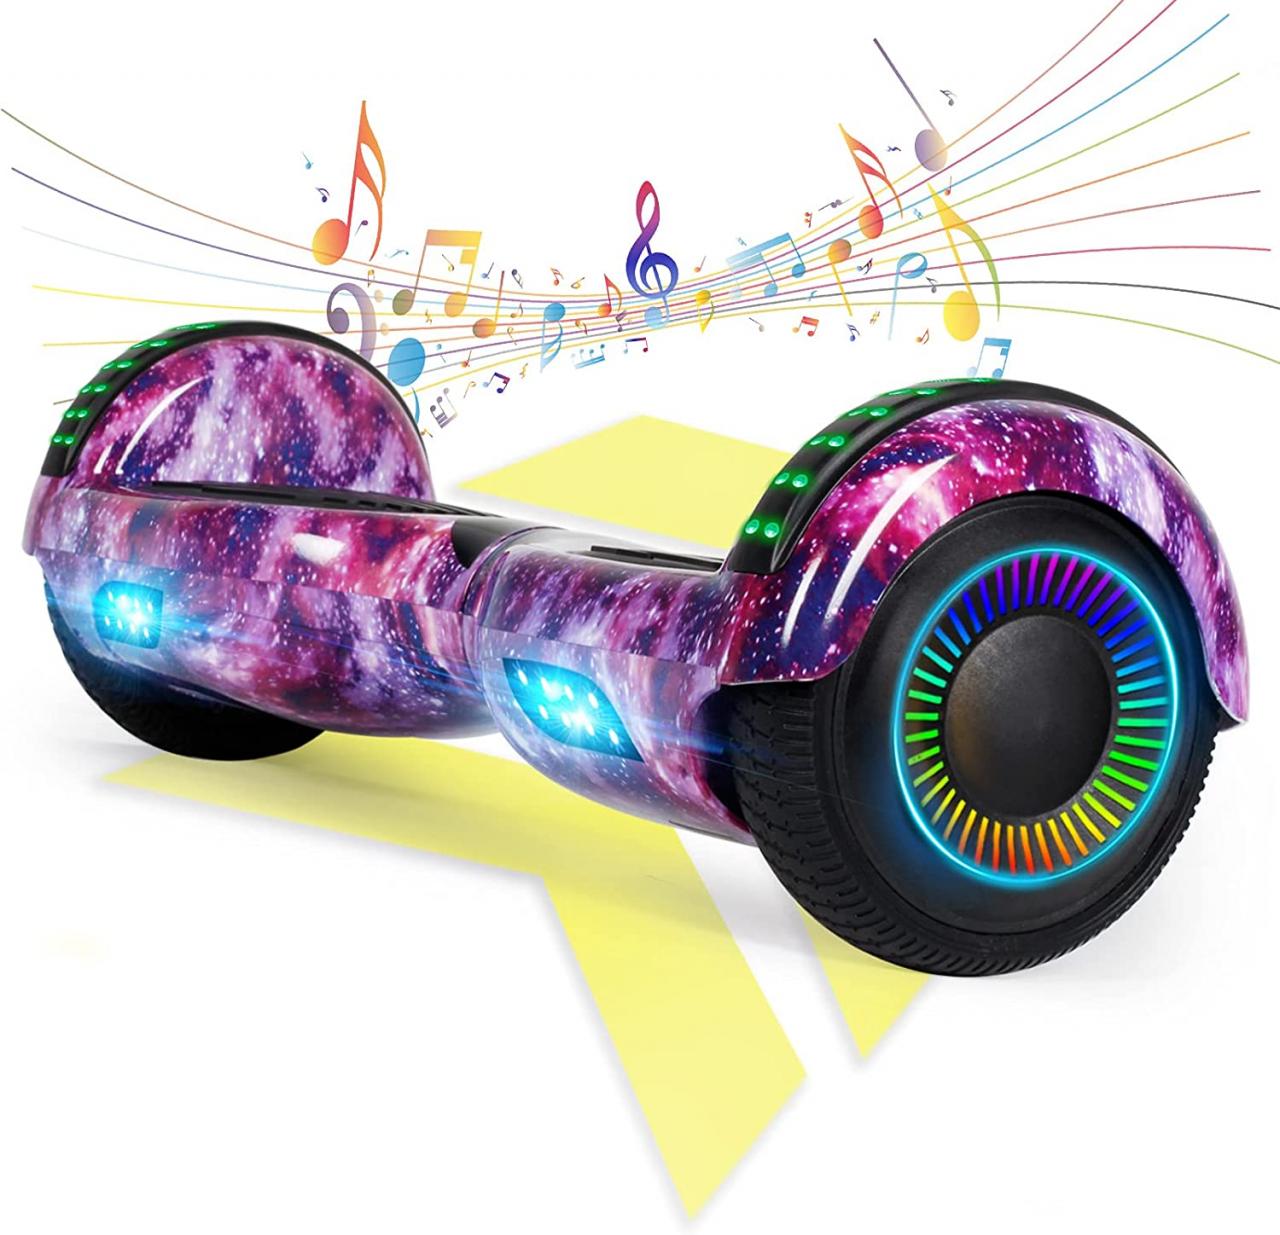 Buy FLYING-ANT Hoverboard, Hoverboards for Kids with Bluetooth Speaker and  Led Lights, 6.5inch Two Wheels Self Balancing Hoverboard Online in Hong  Kong. B07MQ9RF8F